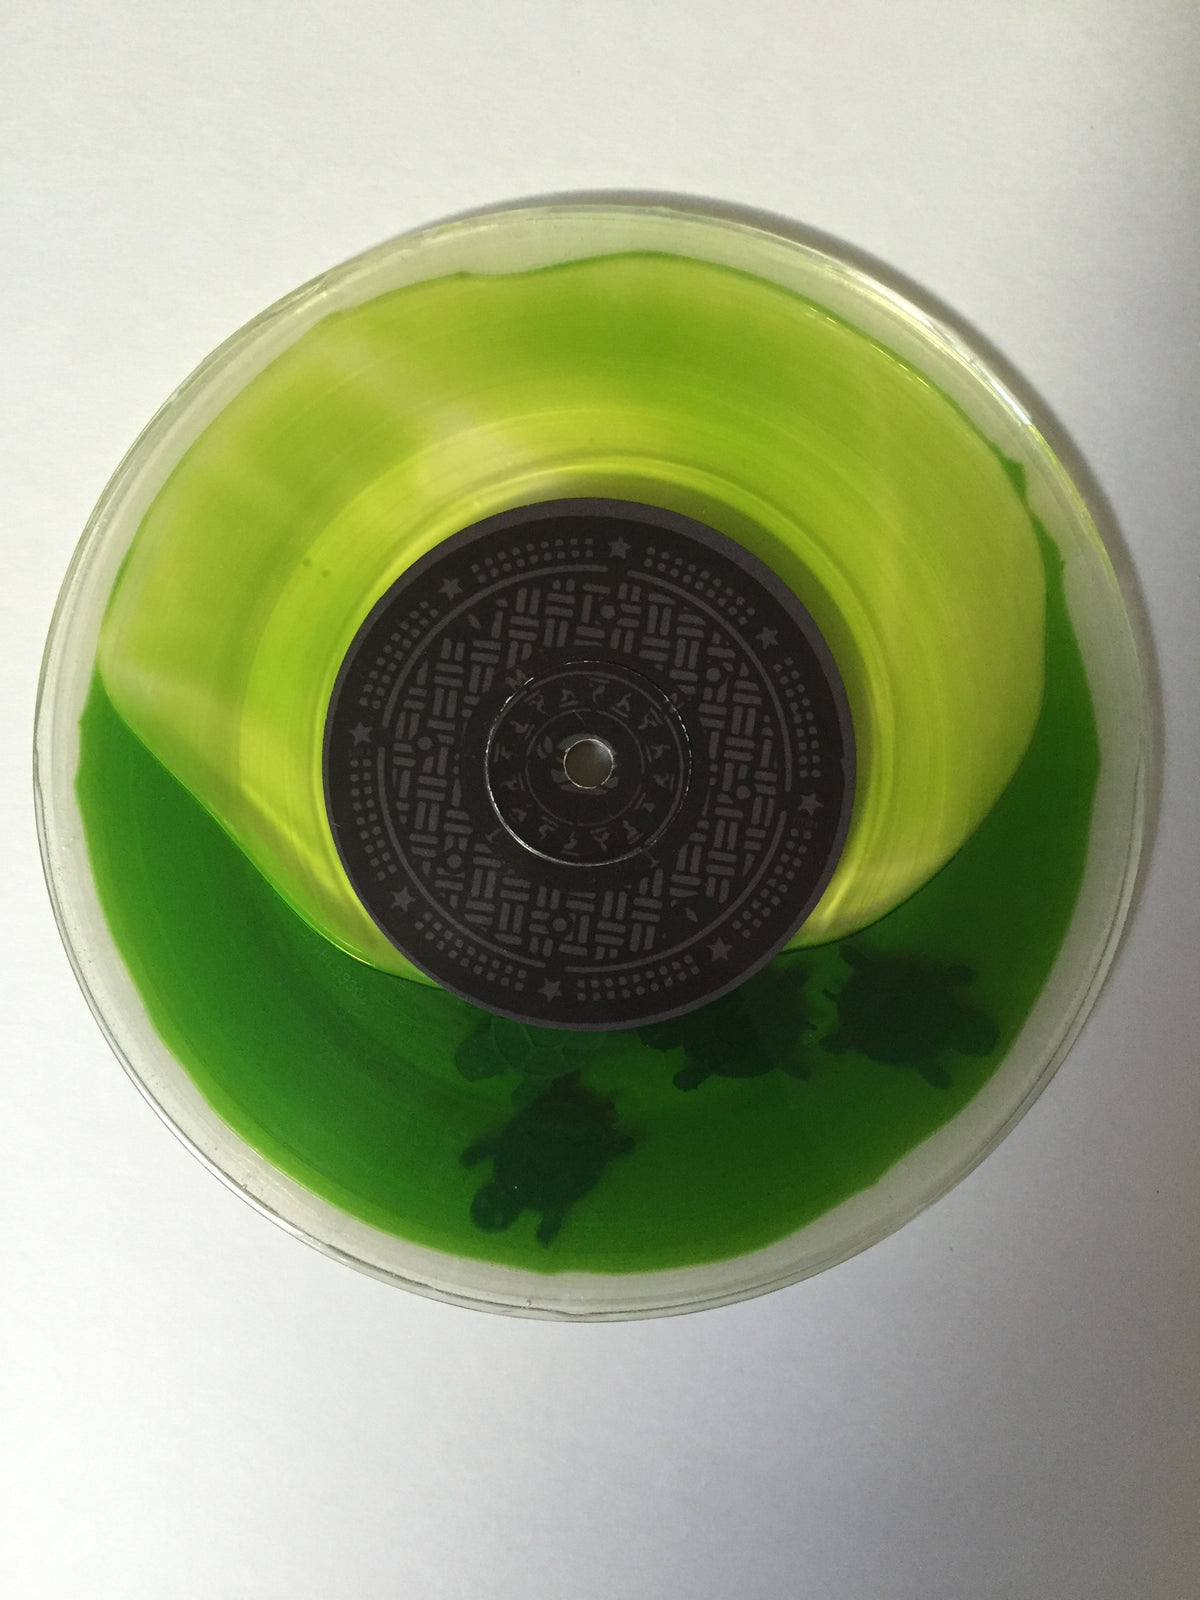 Turtle & Liquid Ooze Filled 7" of Let's Kick Shell!